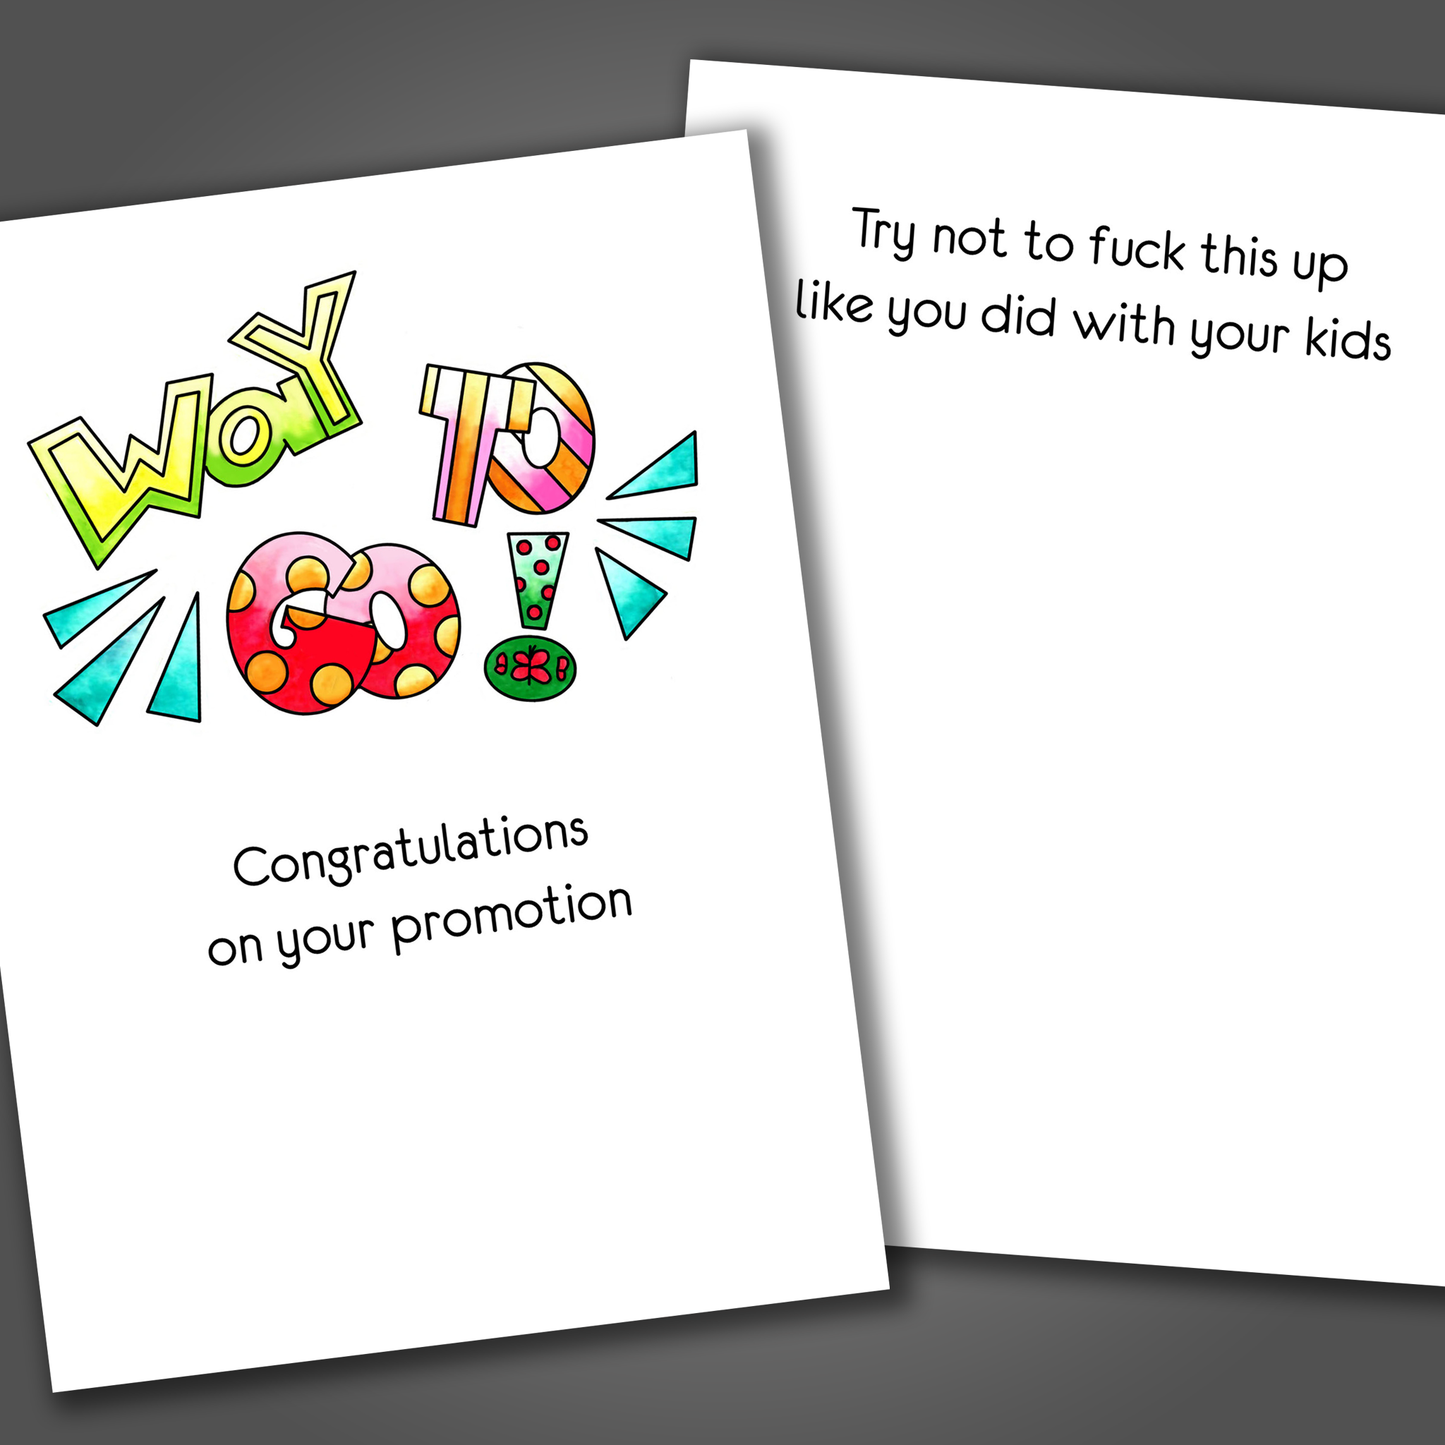 Funny promotion card with the words way to go drawn in various colors on front of the card. Inside the card is the joke try not to fuck this up like you did with your kids.